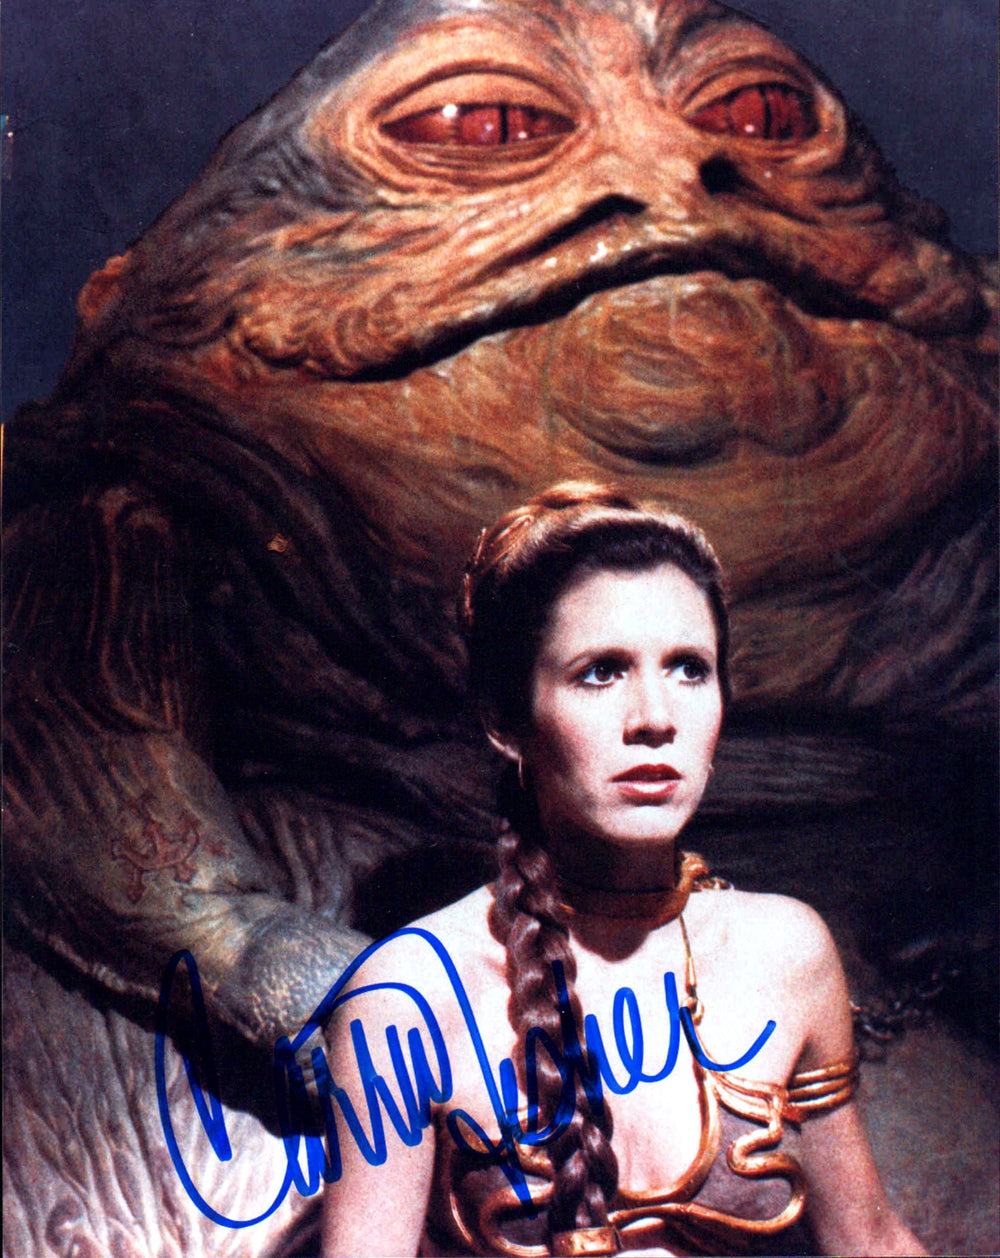 Carrie Fisher as Slave Princess Leia in Star Wars: Return of the Jedi Sexy Signed 8x10 Photo